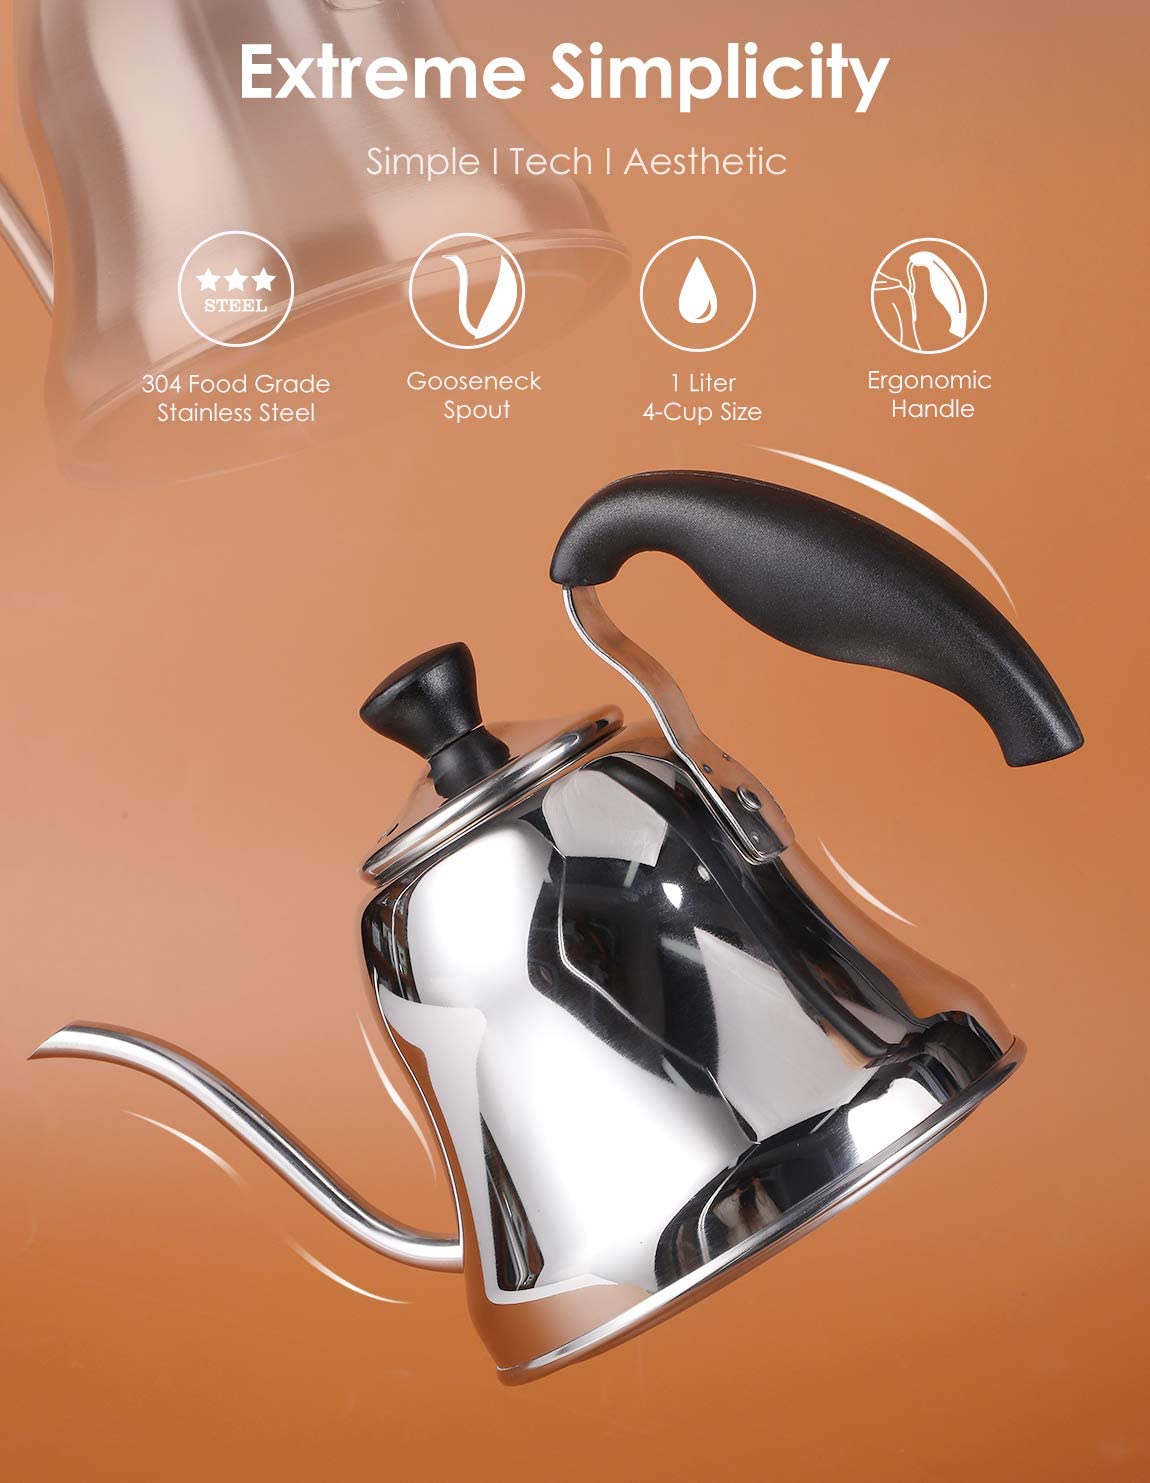 Coffee Kettle for Stove Top Premium Gooseneck Kettle, Small Pour Over  Coffee Kettle, Goose Neck Tea Pot Stovetop Teapot, Hot Water Heater for  Camping